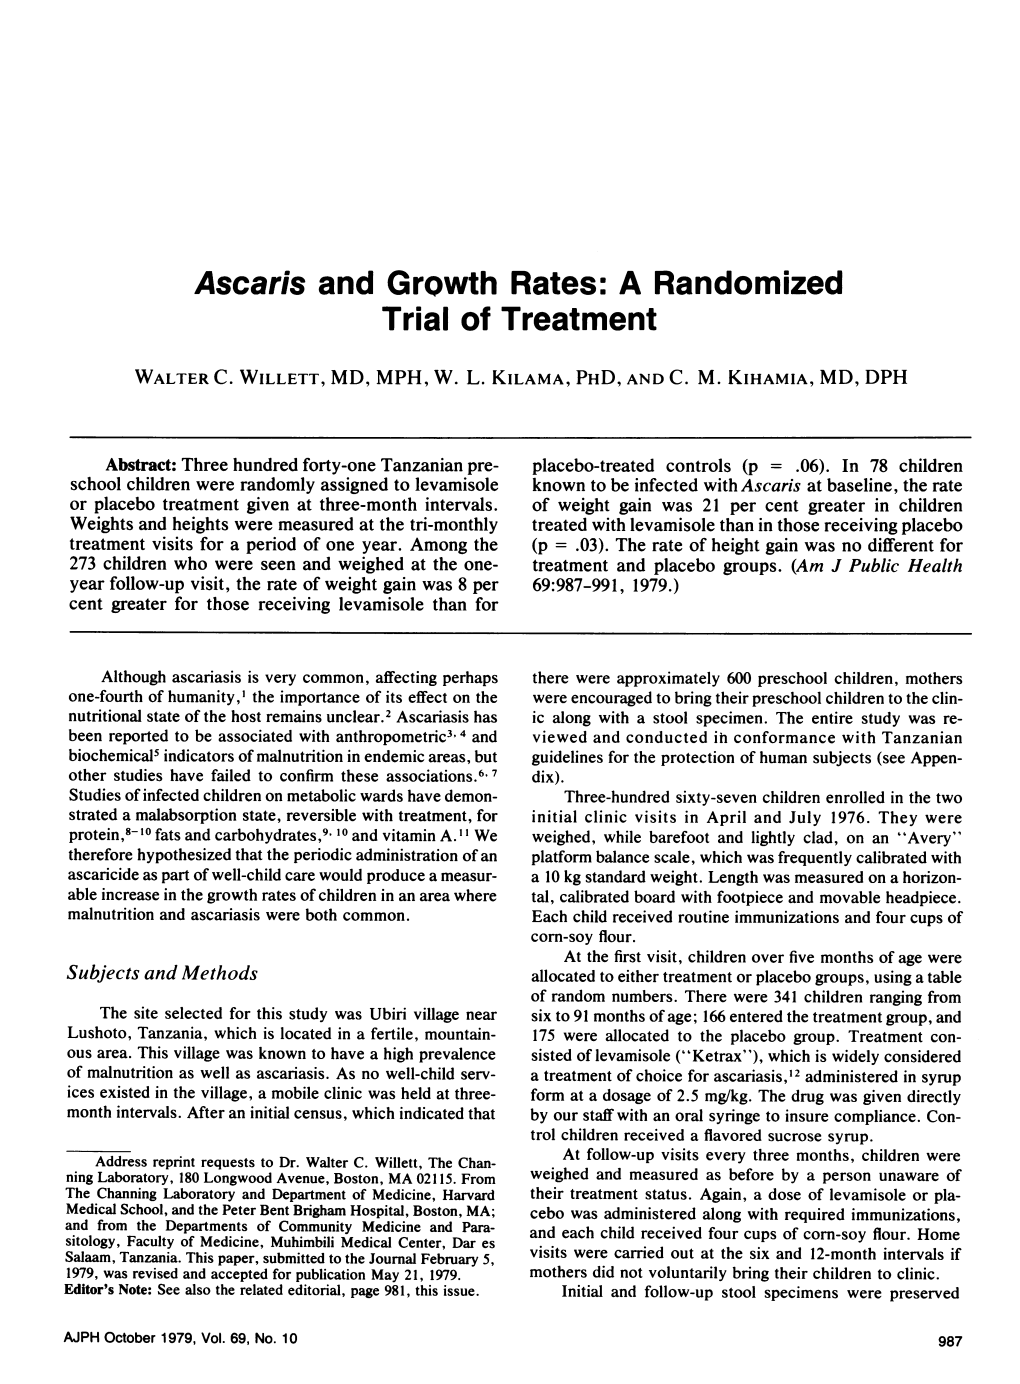 Ascaris and Growth Rates: a Randomized Trial of Treatment